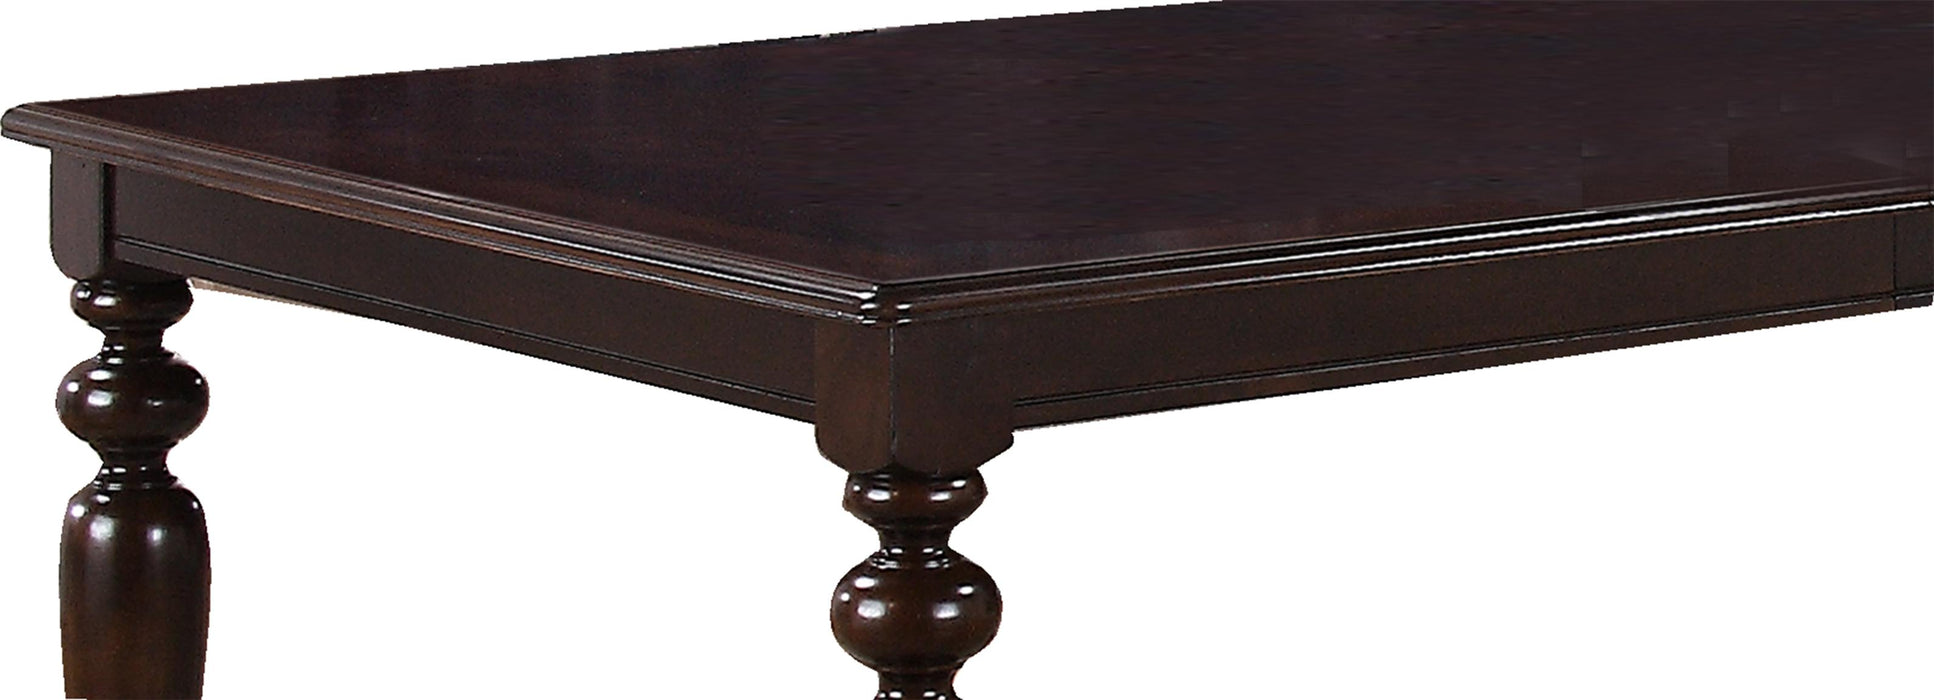 Zora Transitional Style Dining Table in Cherry finish Wood